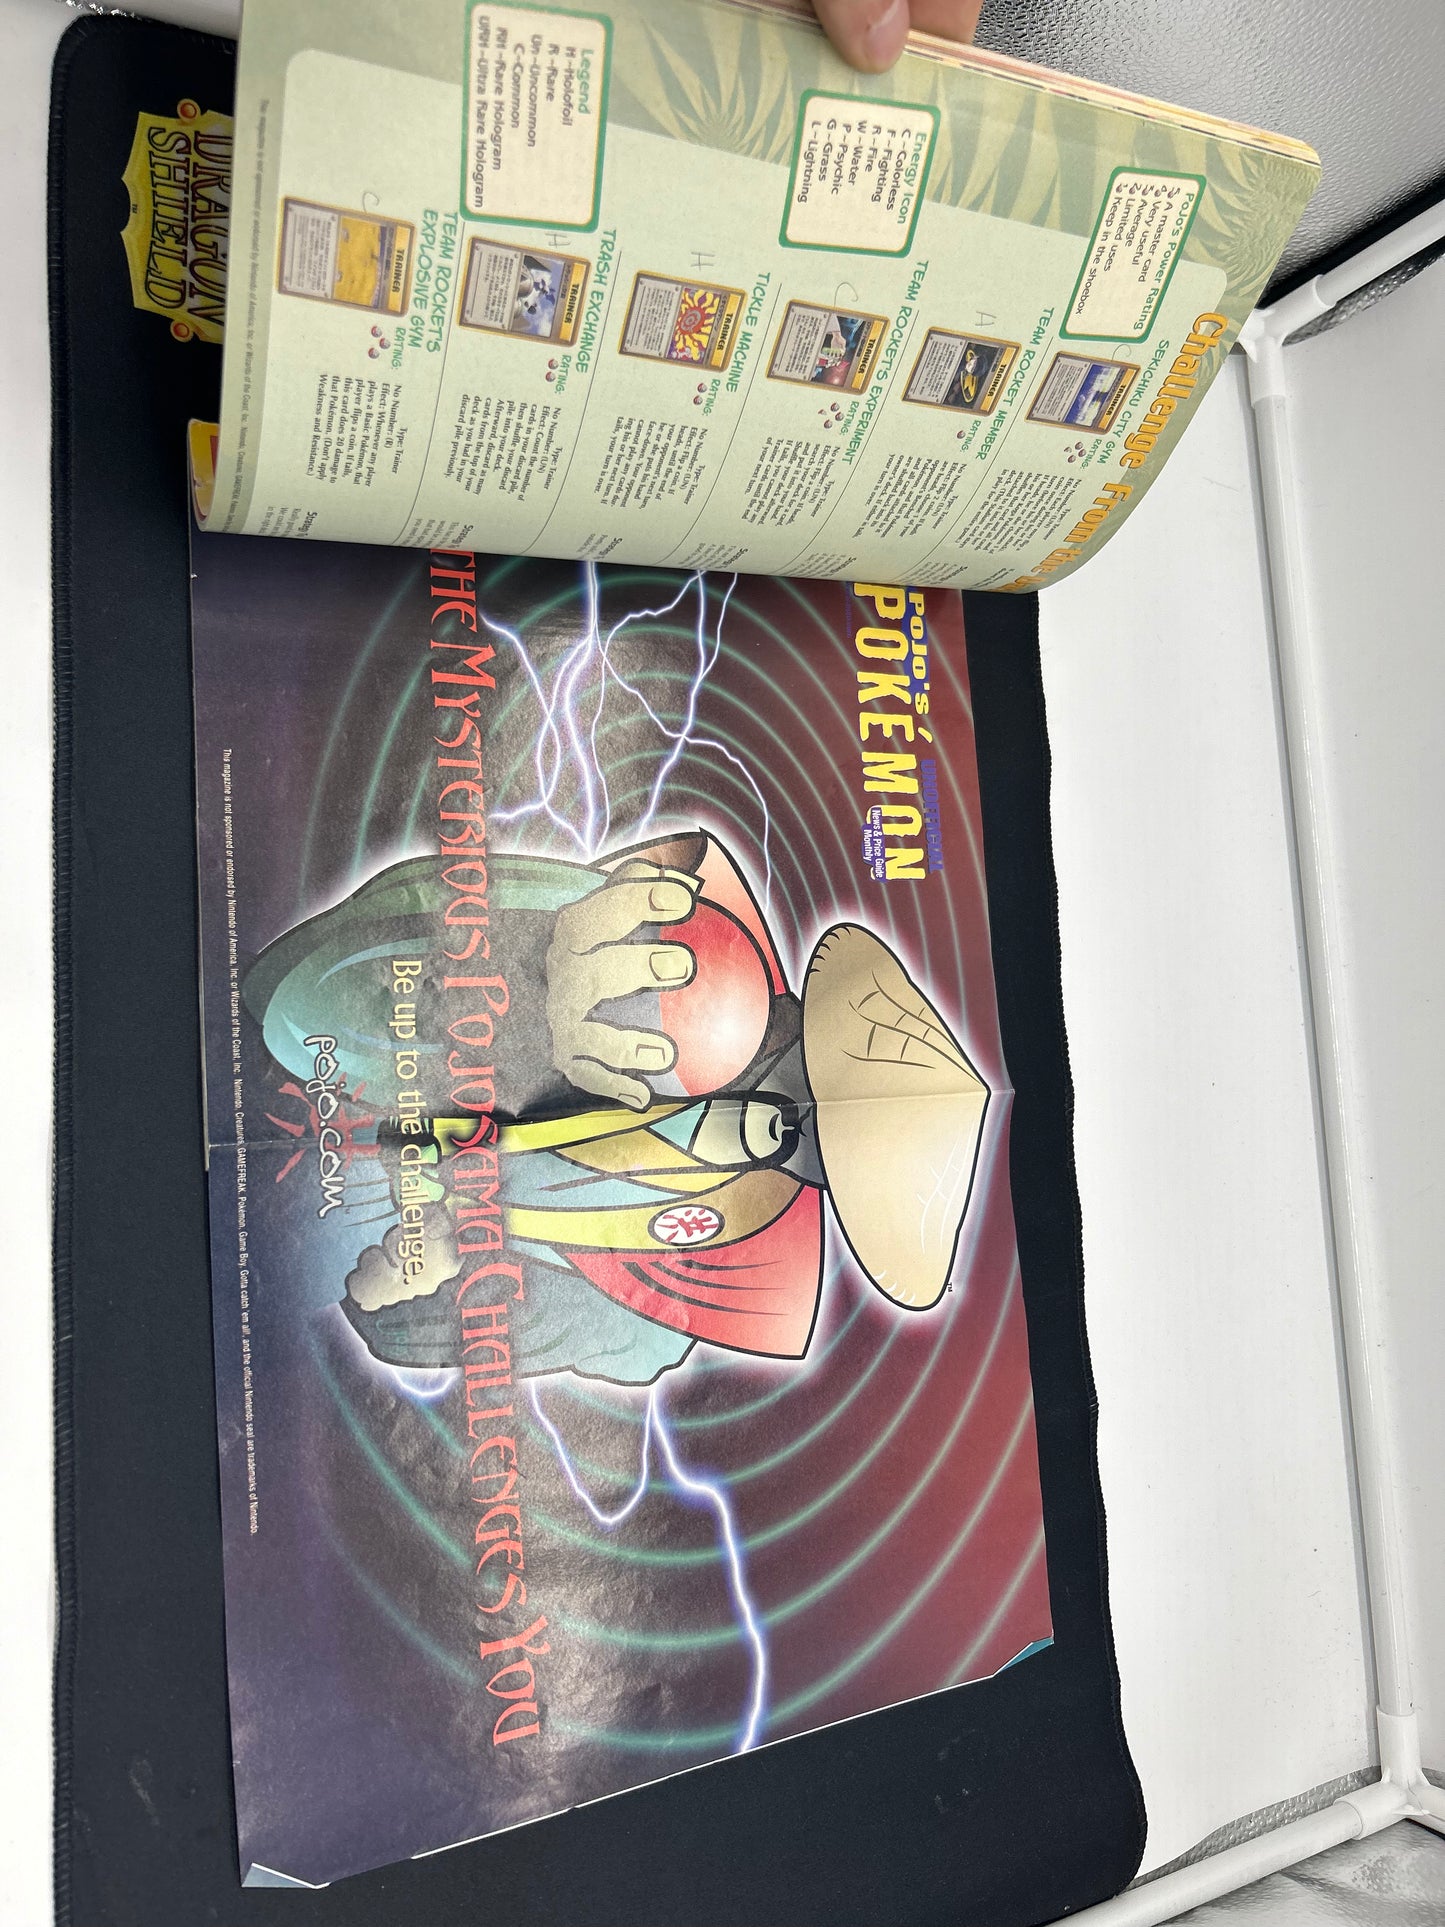 Old Pokemon strategy guide auction *with insert still!*